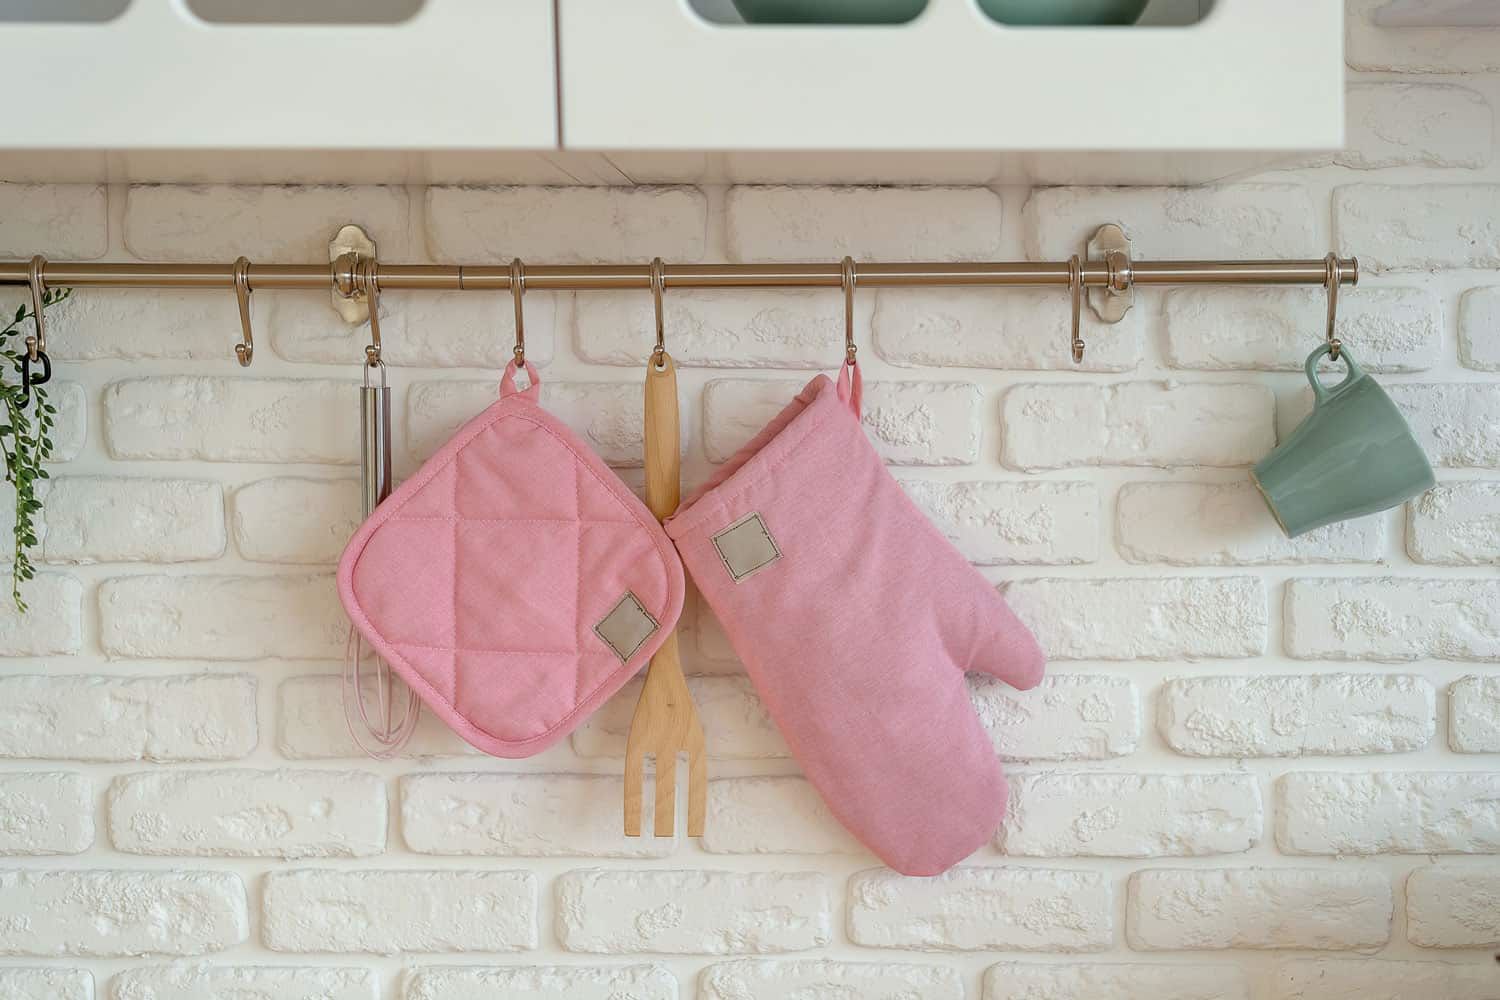 How To Store Oven Mitts